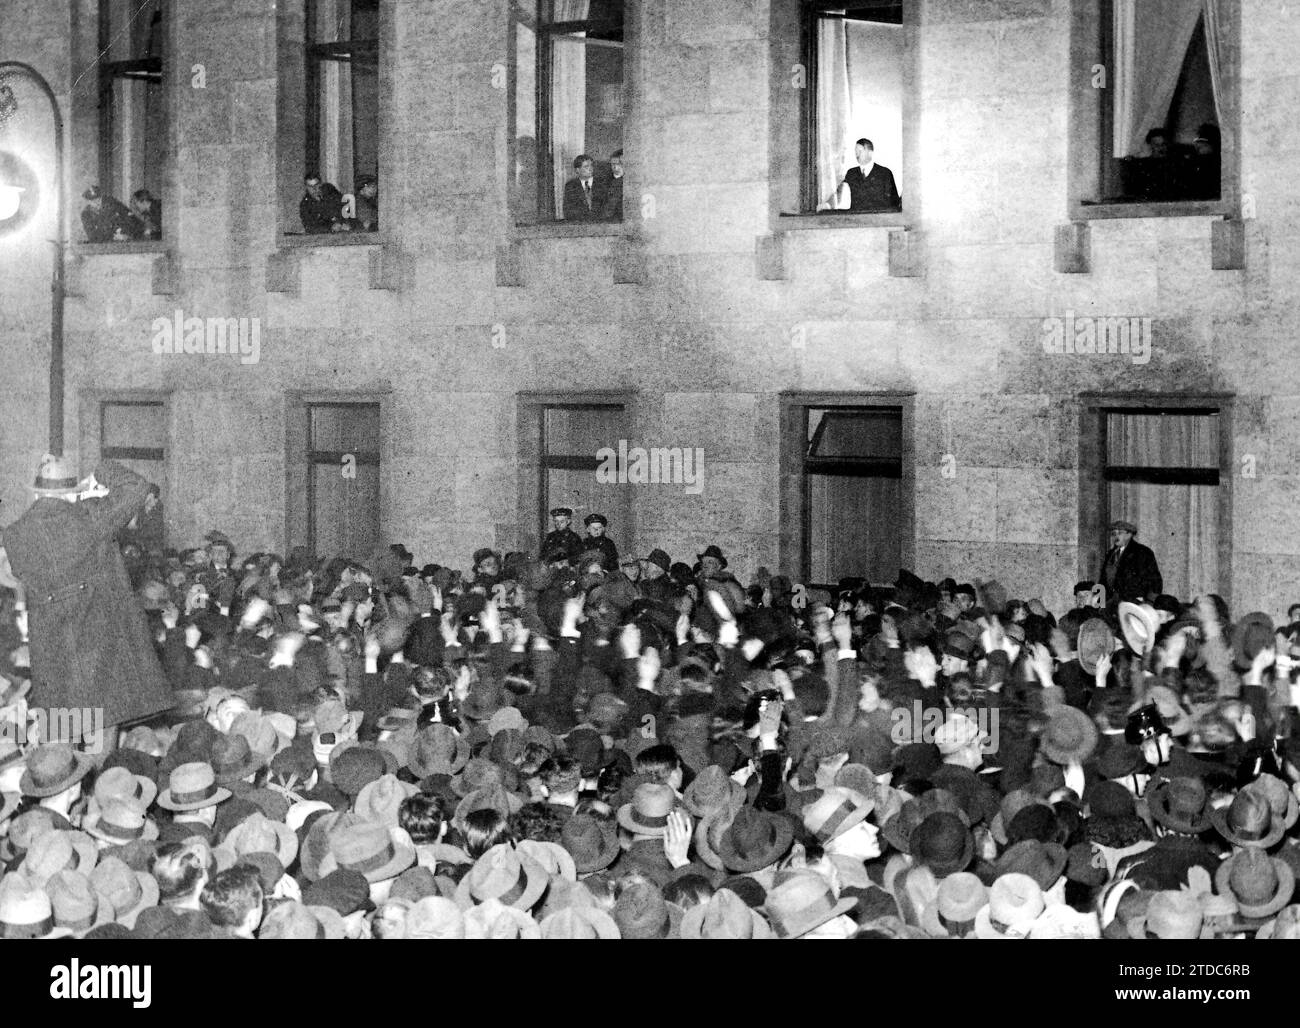 Germany. 01/30/1933. The new Chancellor, Adolf Hitler, in one of the windows of the Chancellery, greeting the crowd that cheers him after taking office, on January 30, 1933. Credit: Album / Archivo ABC / Vidal Stock Photo